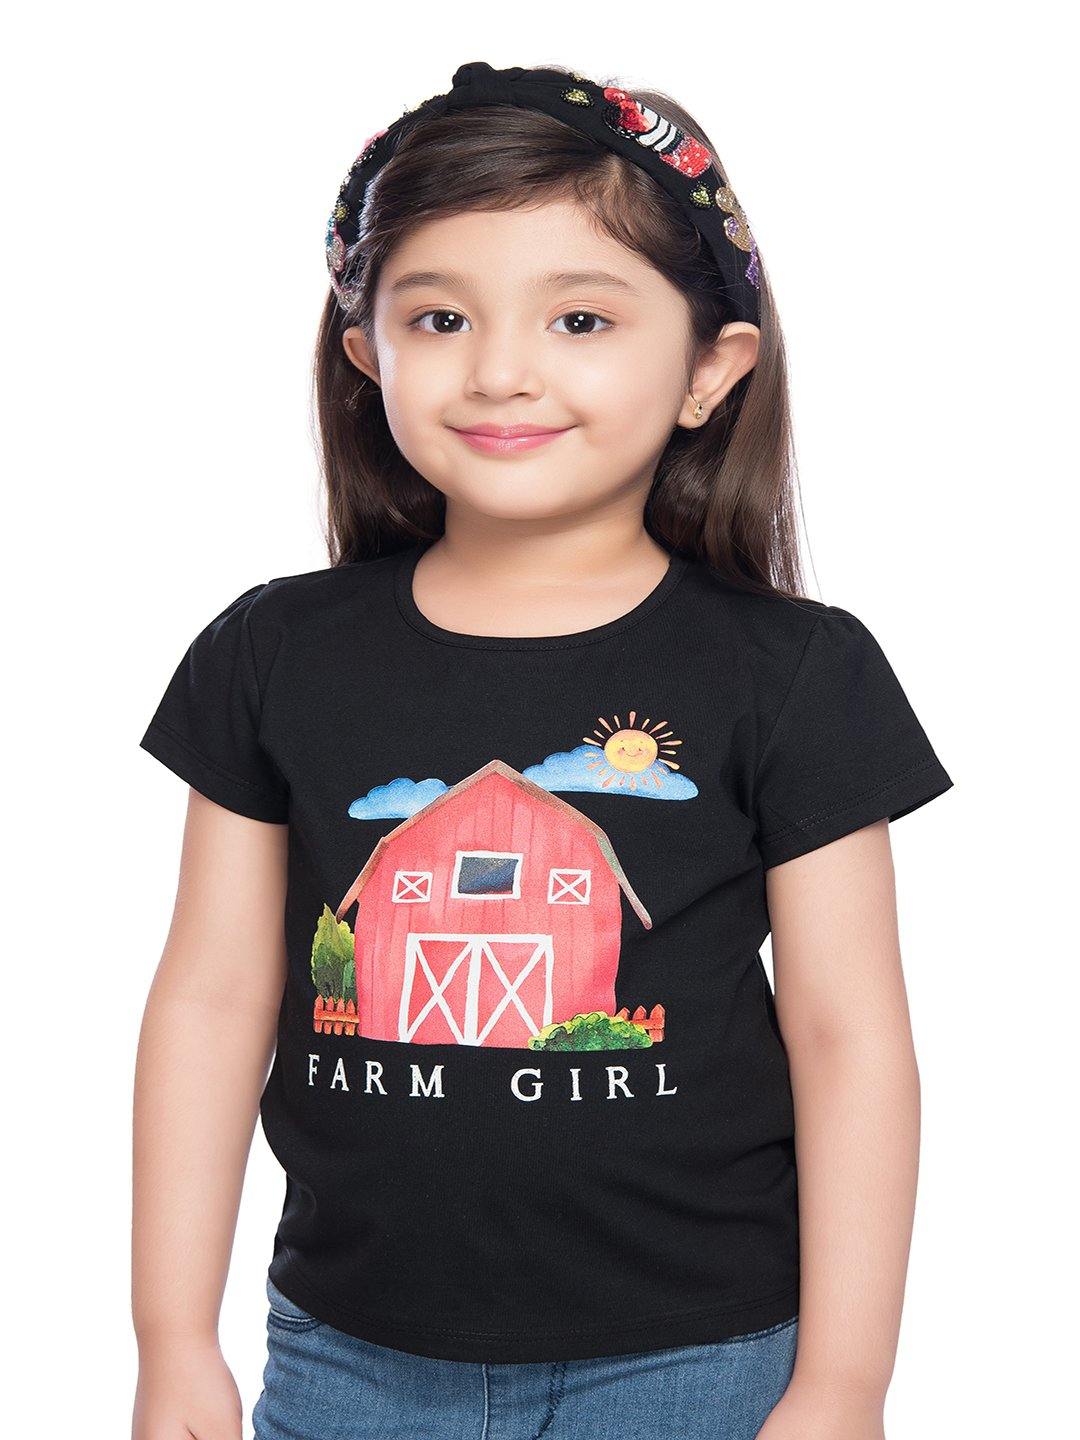 Tiny Baby Black Colored Top - T-106 Black - TINY BABY INDIA shop.tinybaby.in